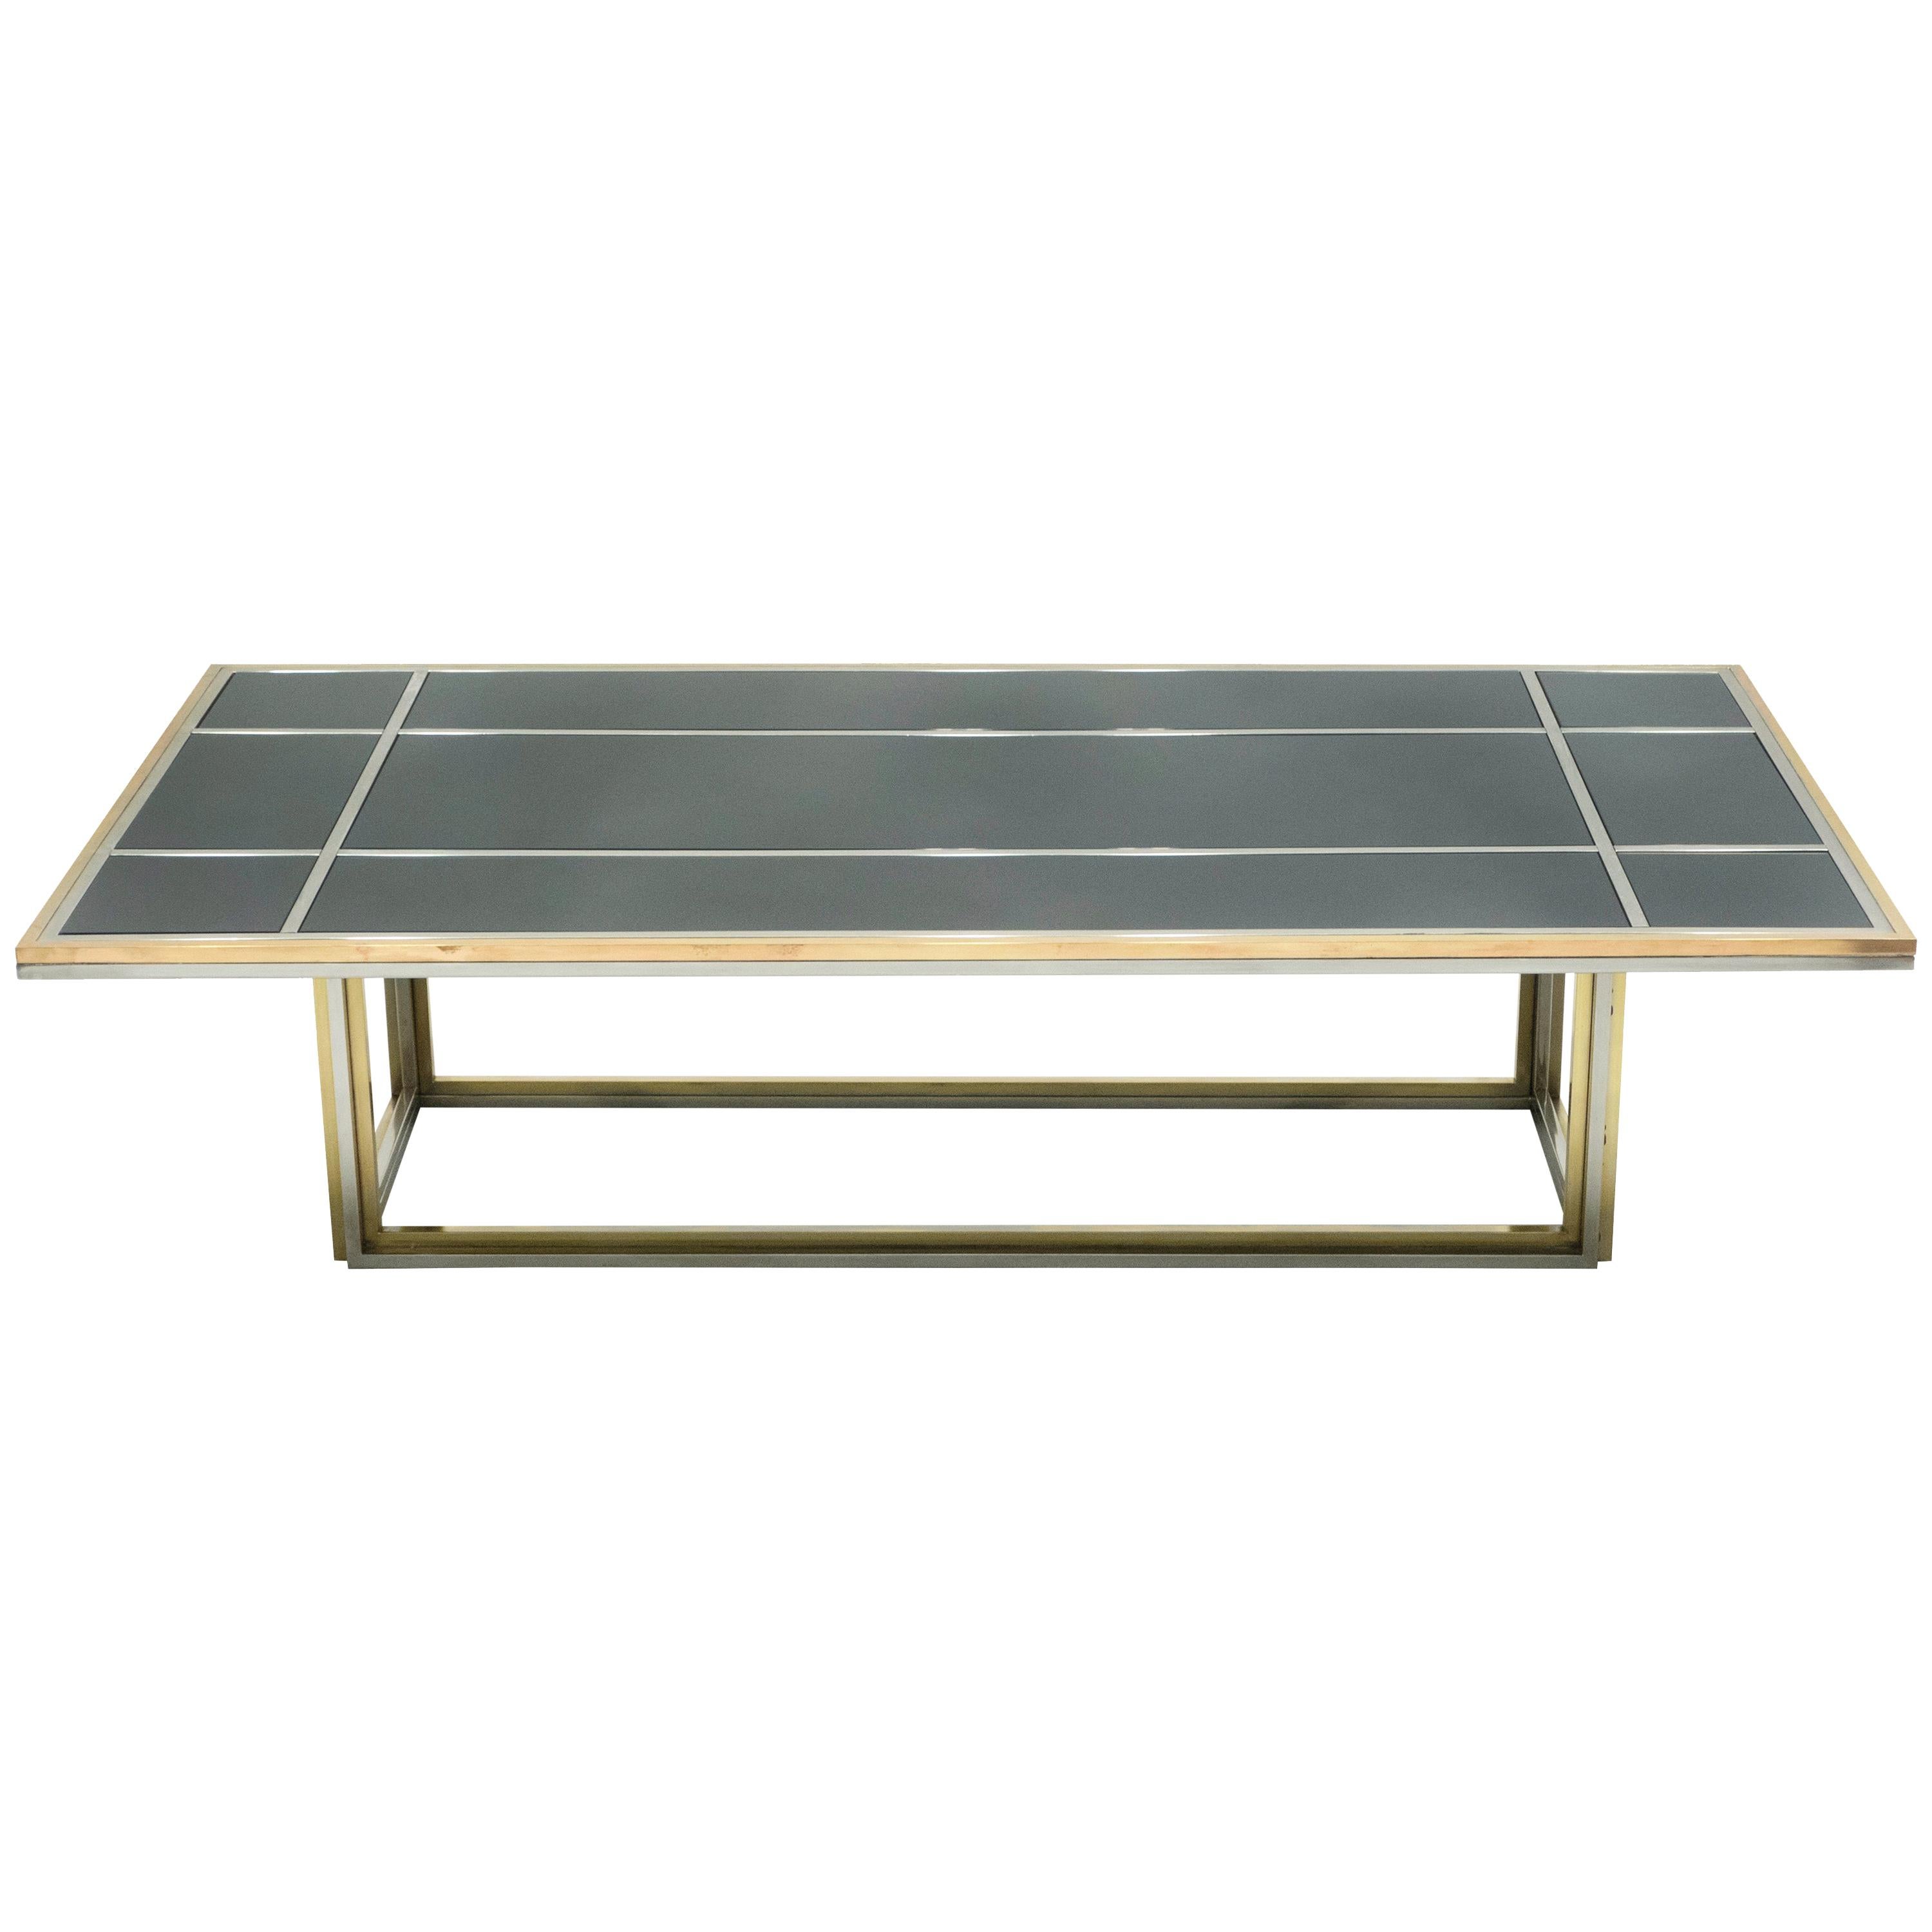 An intriguing piece of design, this coffee table deserves to be the focal point of a room. Symmetrical brass and chrome elements strike through a black opaline glass top, the result being an impressively sleek living room centerpiece. Made in Italy